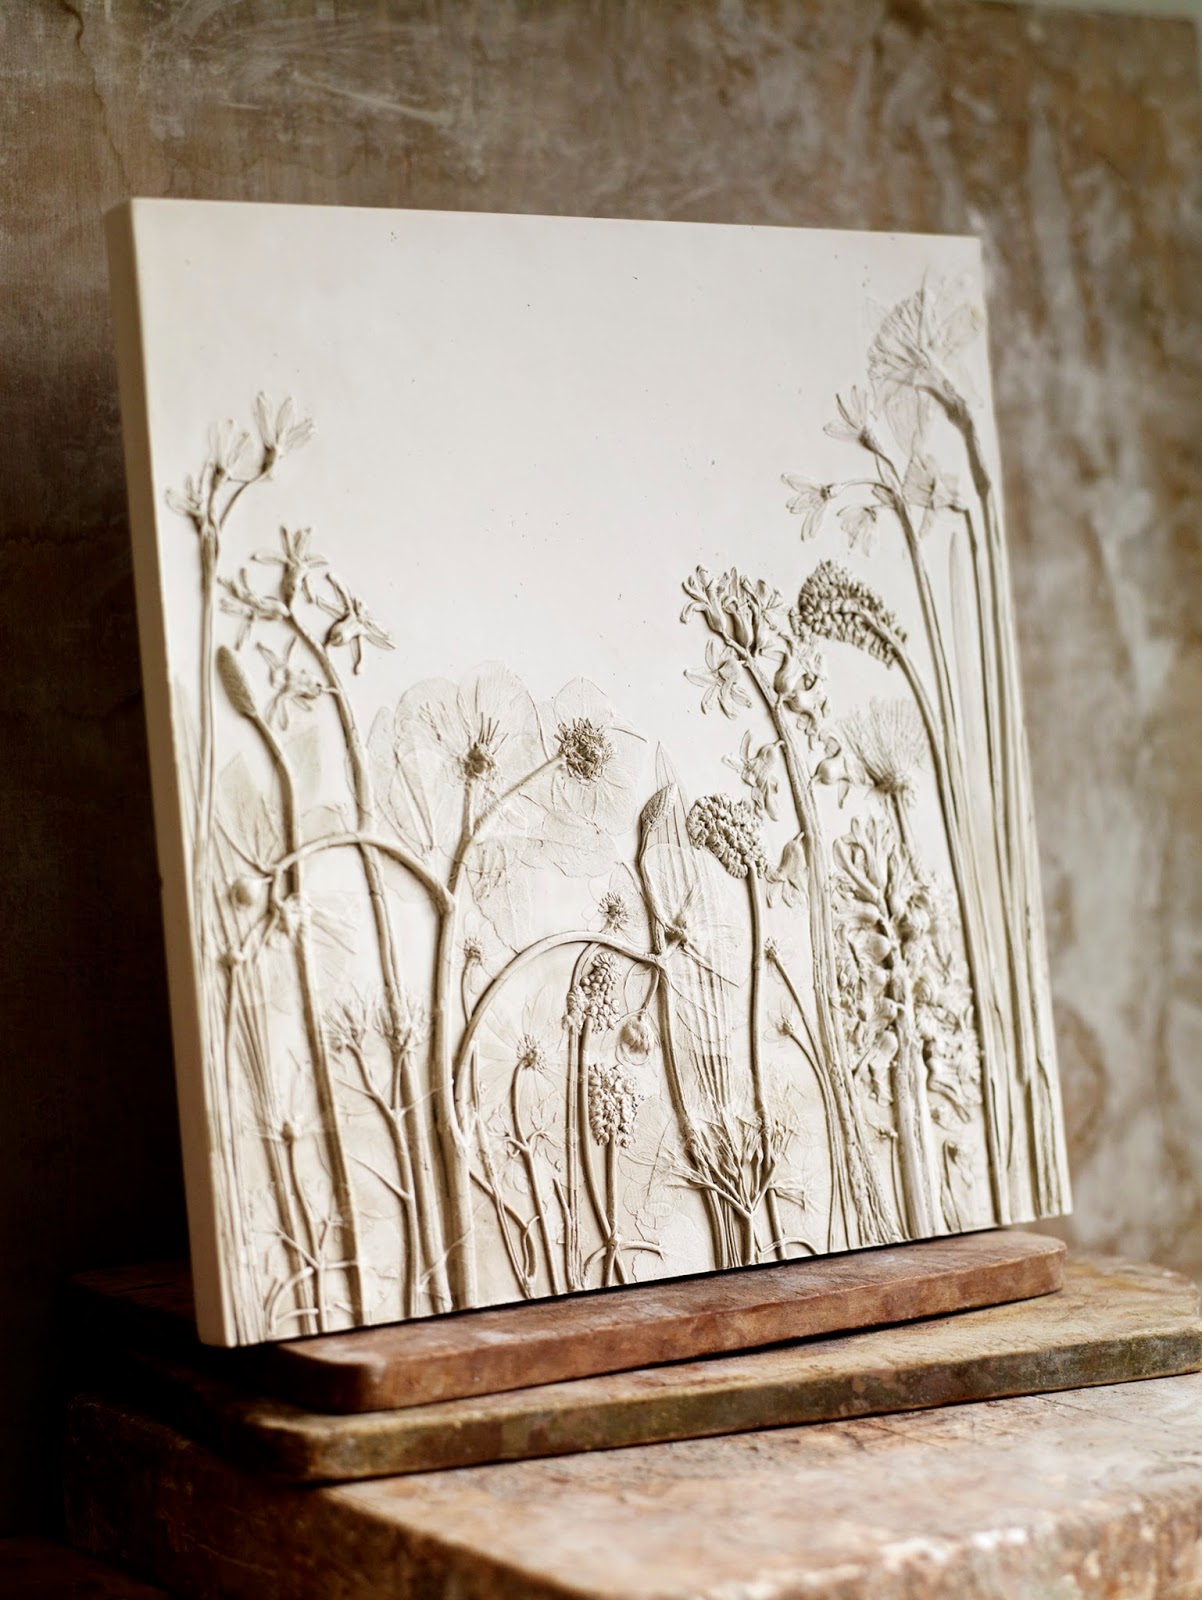 How to make botanical plaster cast tiles with flowers